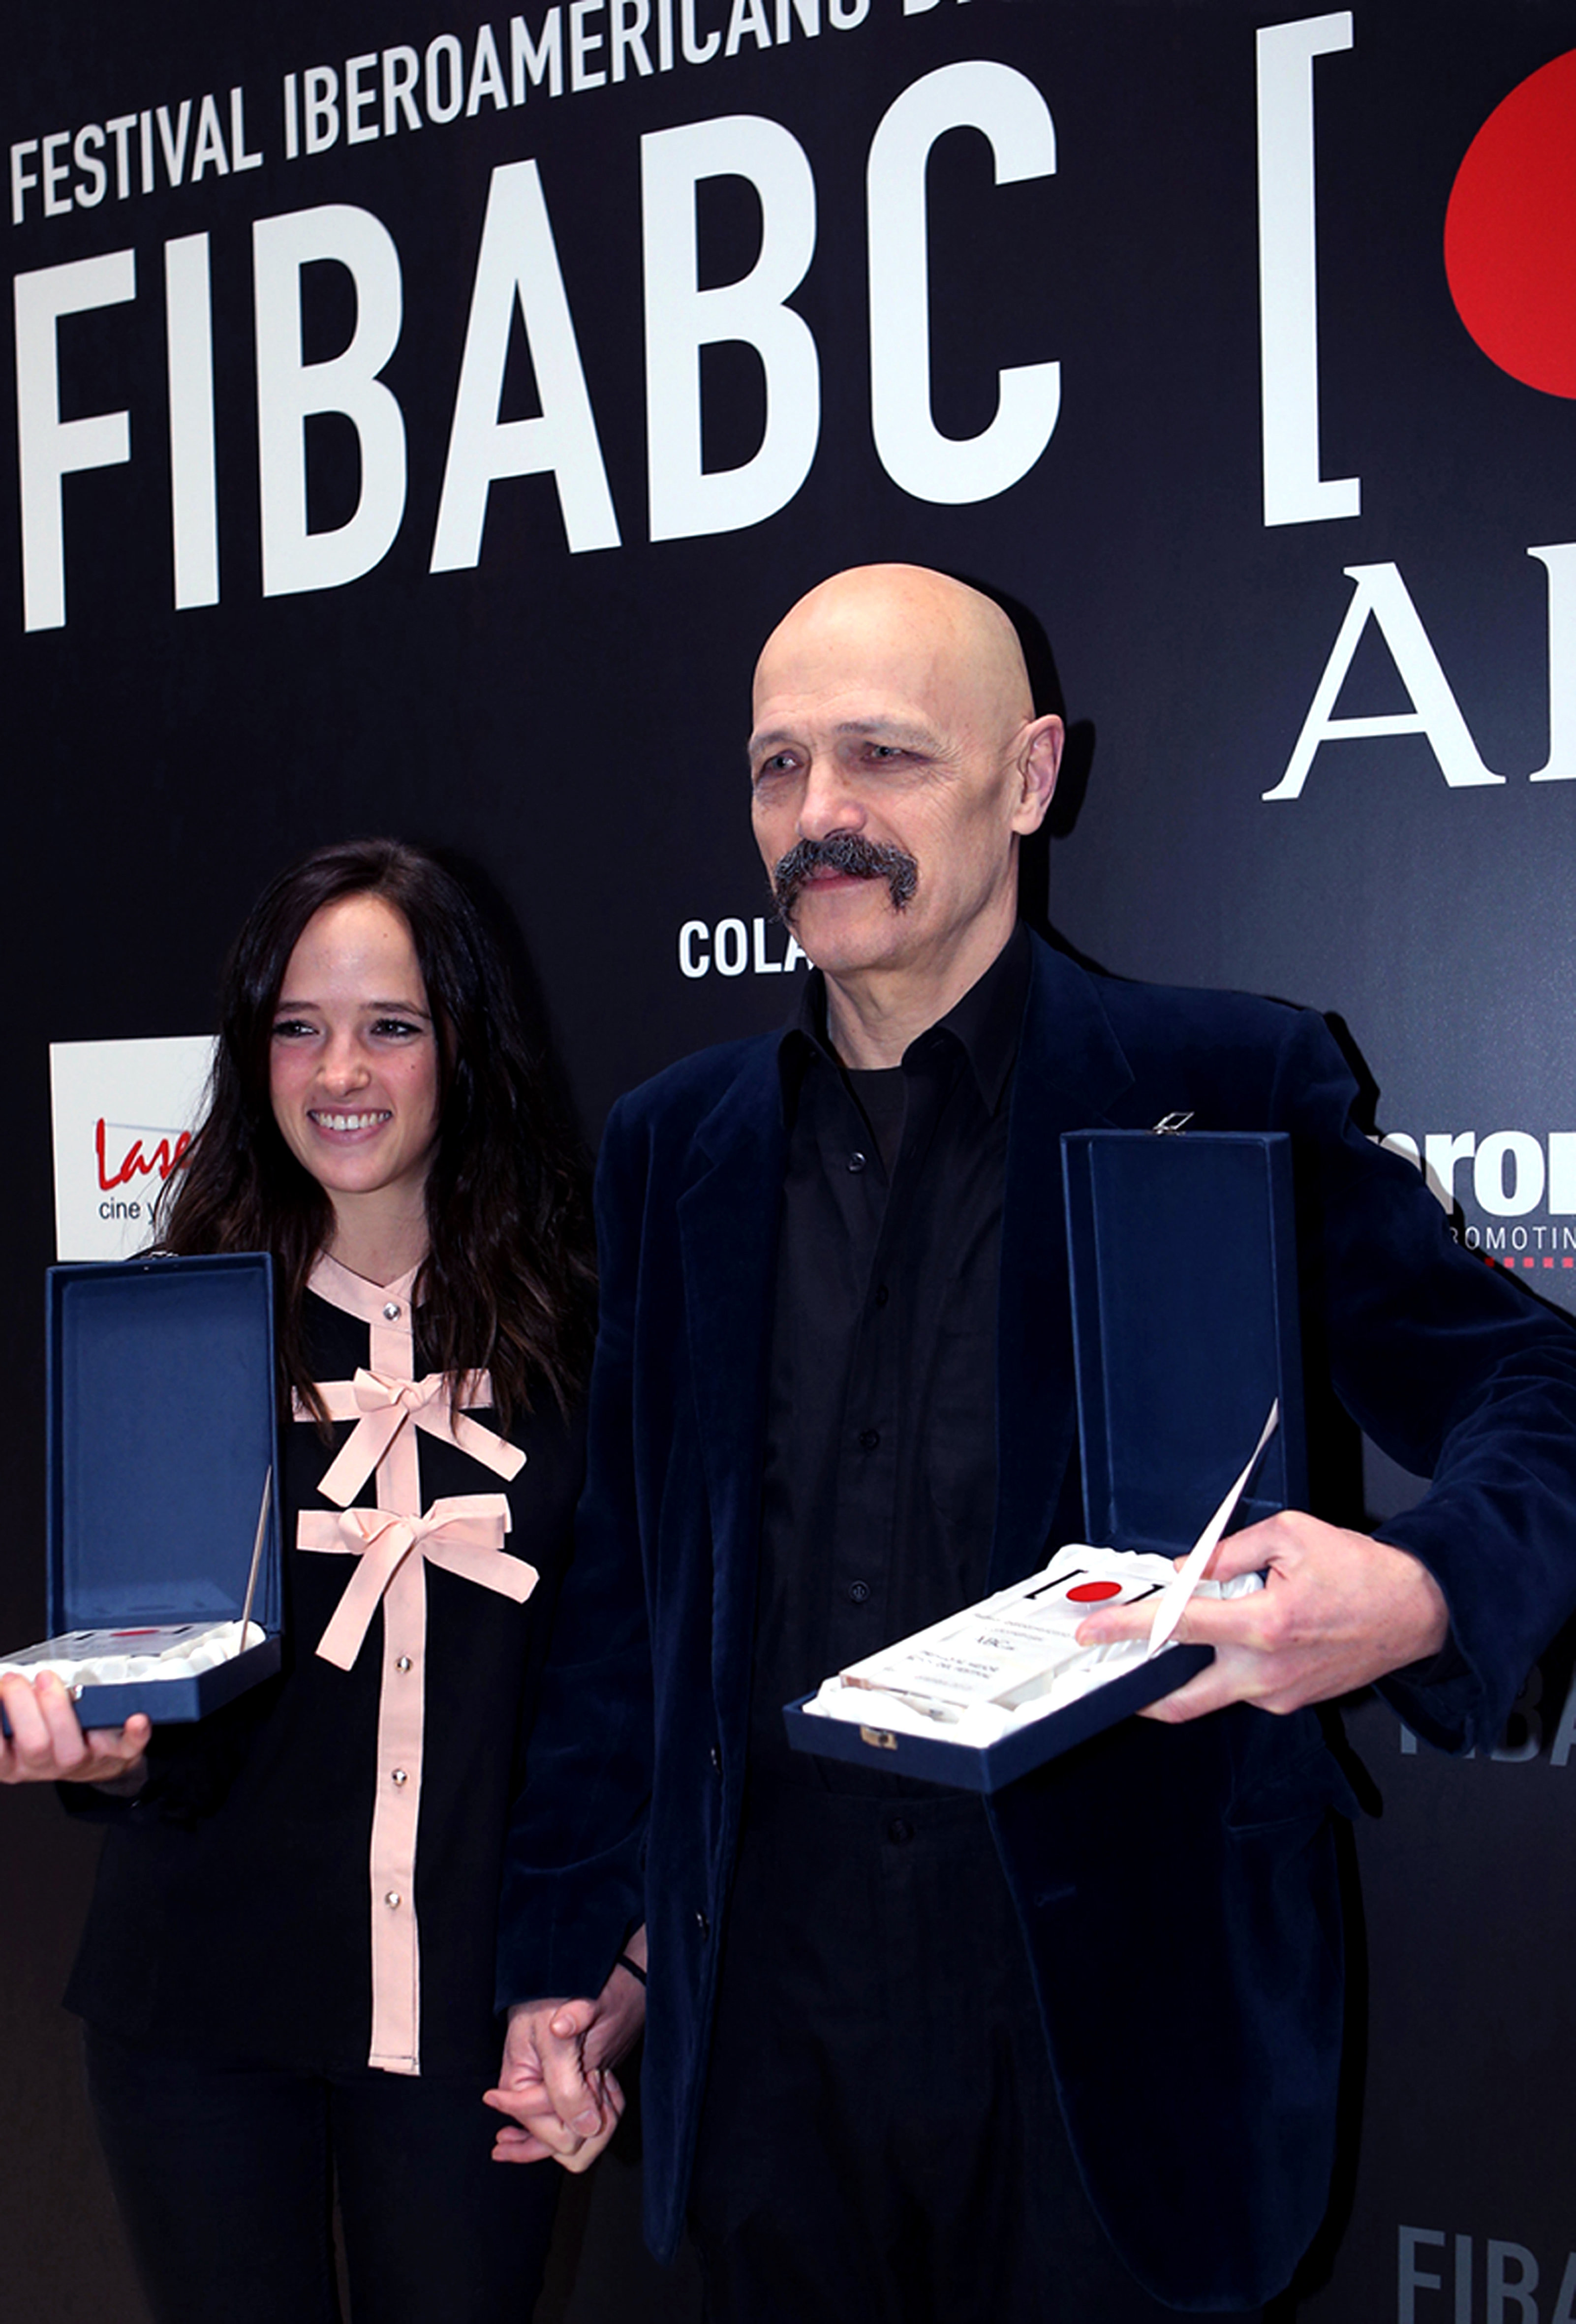 4th Annual FIBABC Awards in Madrid. Olegar Fedoro wins Best Actor for The Hummingbird (2013) and Susana Abaitua wins best Actress for Tight (2013)